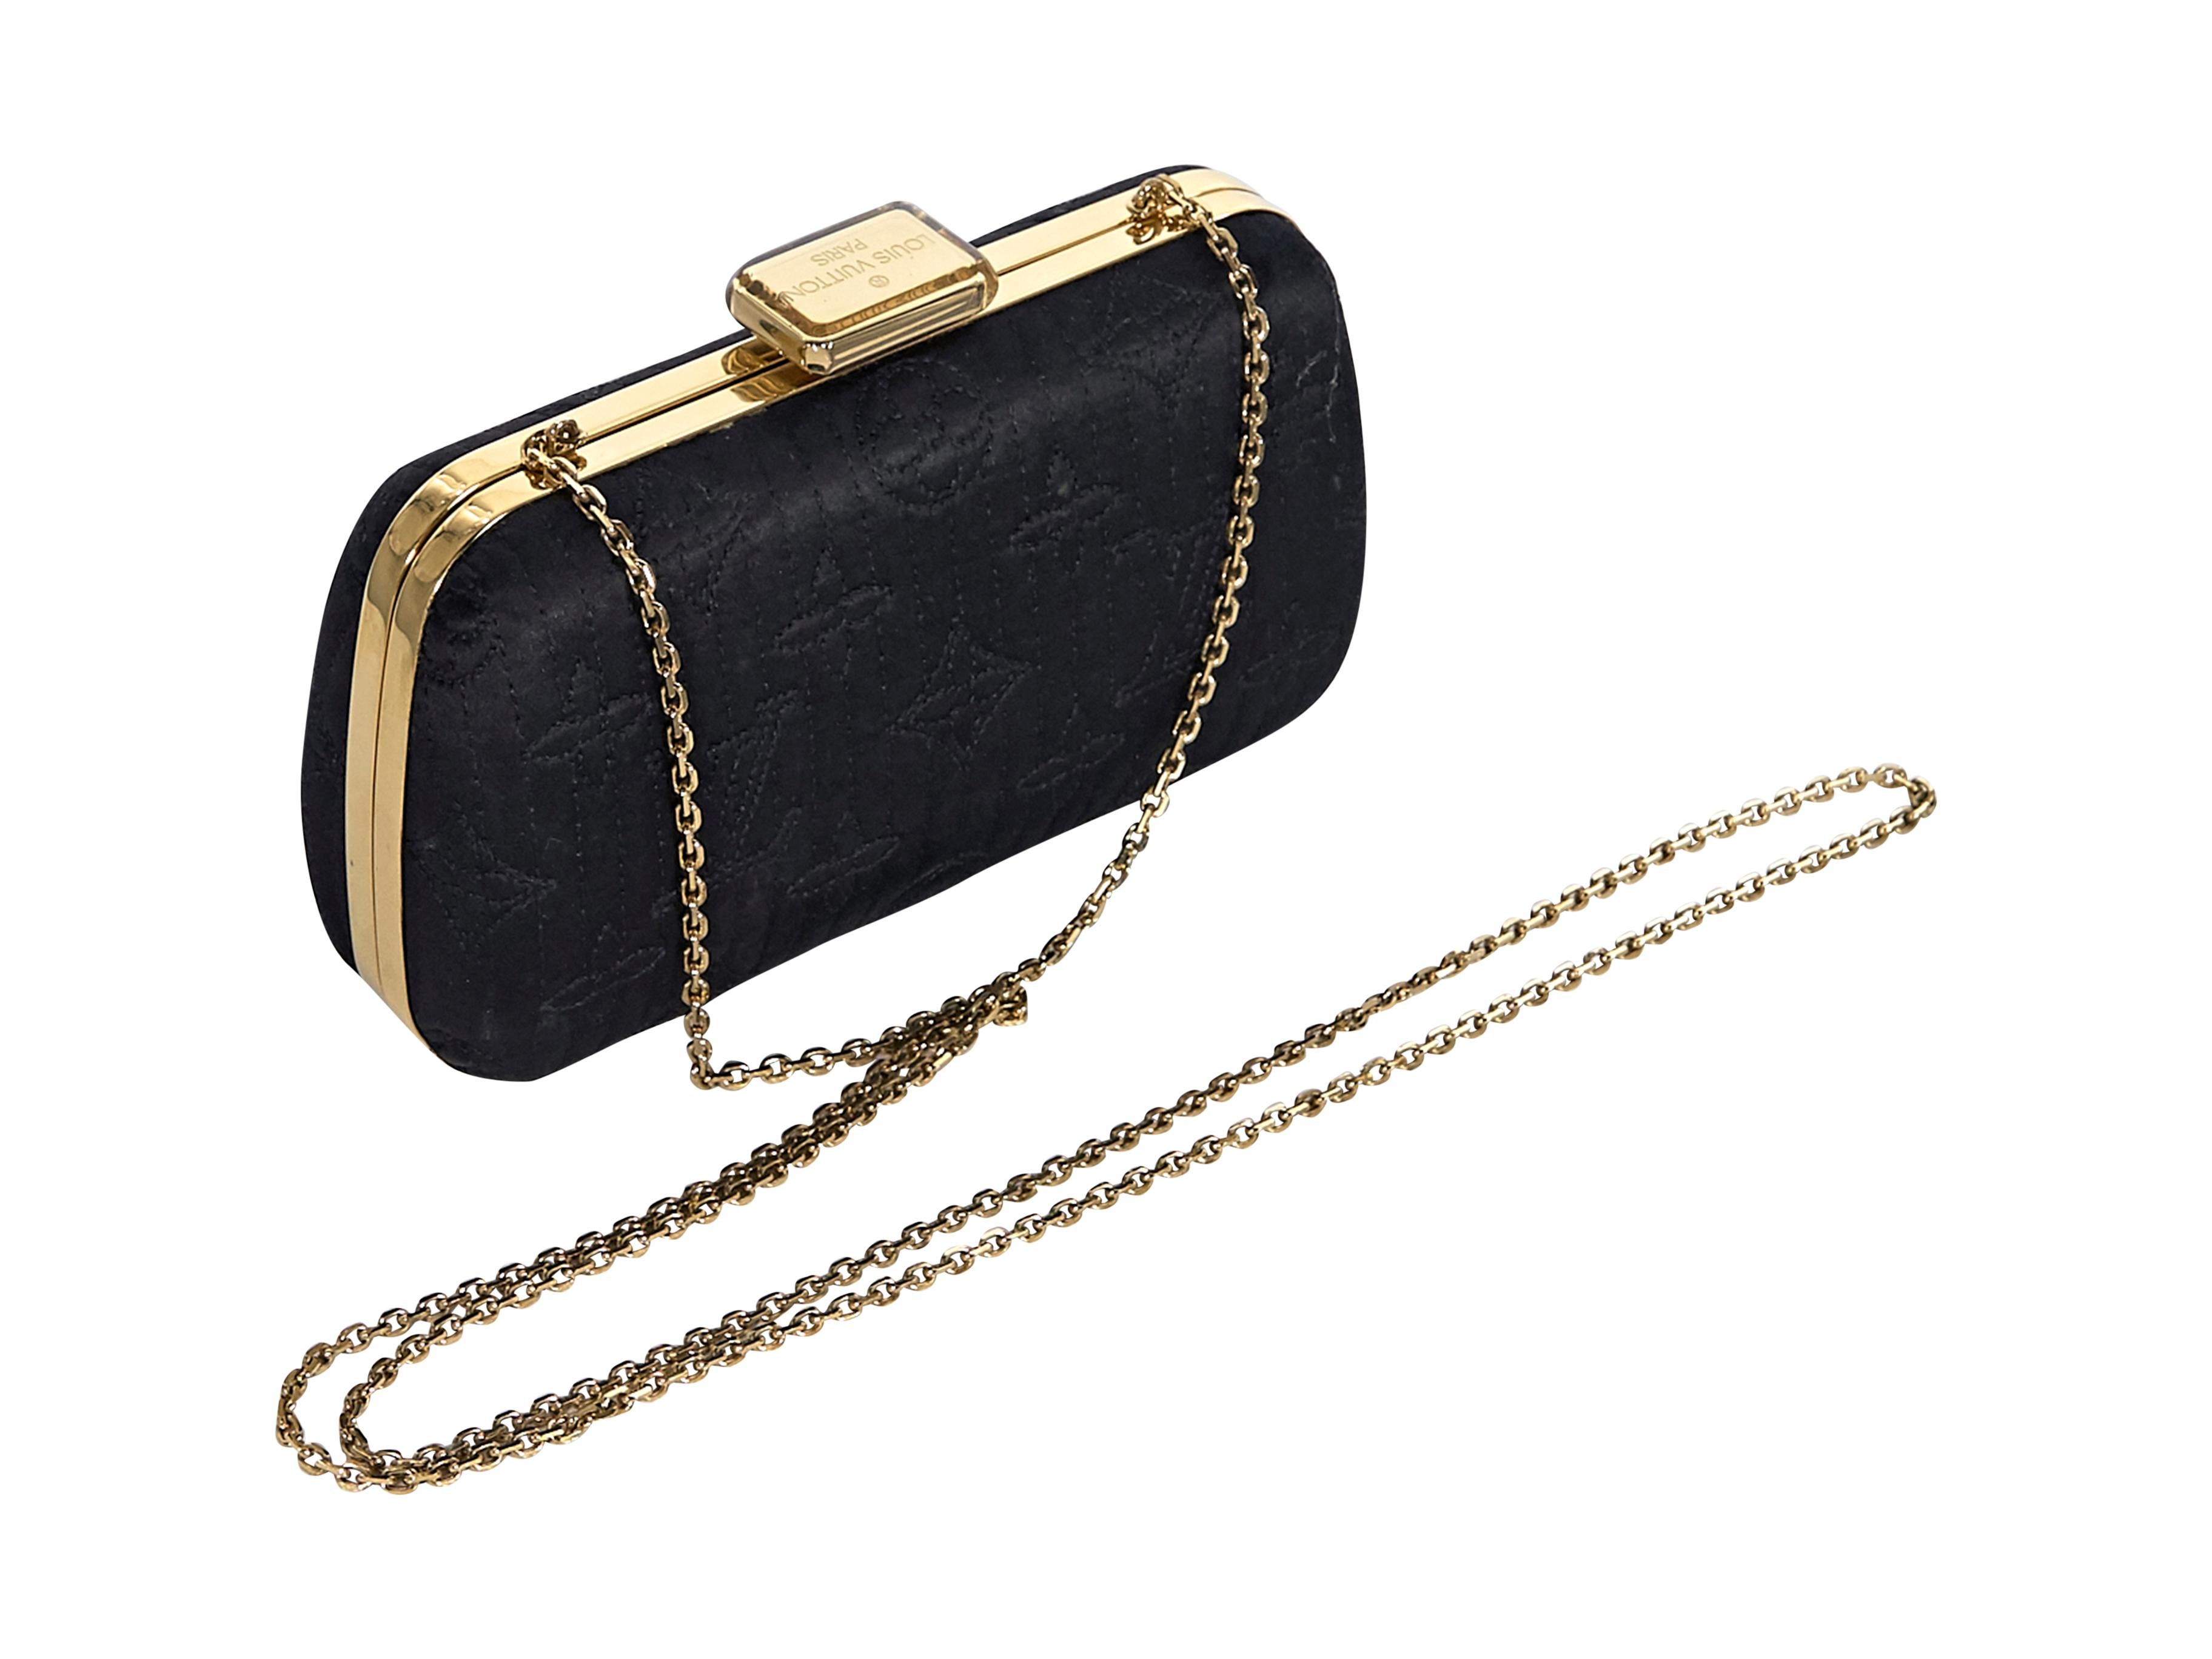 Product details:  Black monogram quilted satin clutch by Louis Vuitton.  Tuck-away shoulder strap.  Top push clasp closure.  Leather lined interior . Goldtone hardware.  6.5